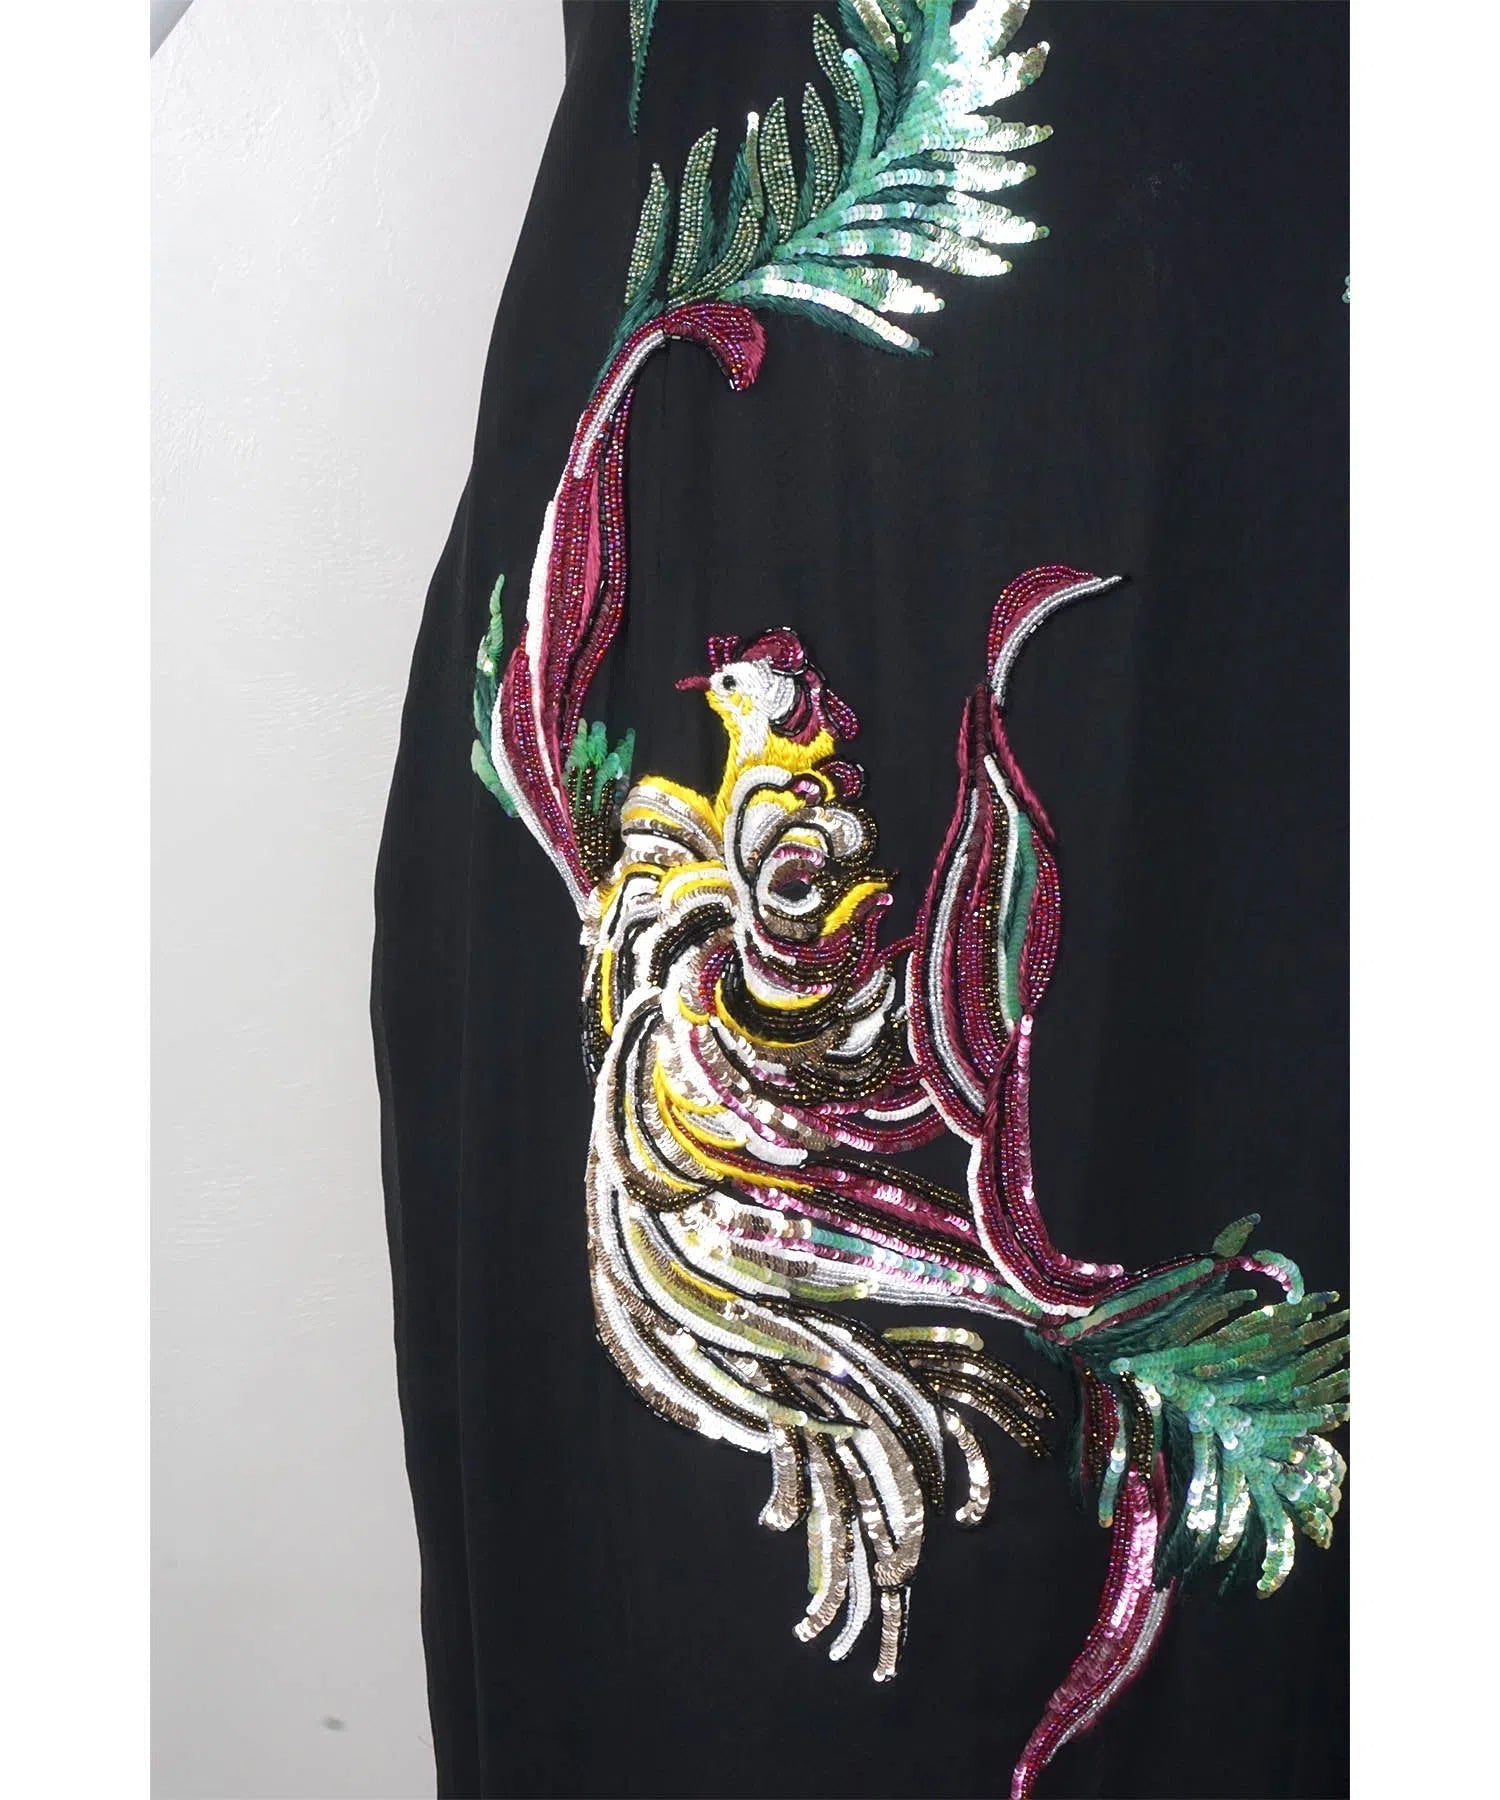 Givenchy Couture by Alexander McQueen Vintage 1997 Sequin Embroidered Bird Dress